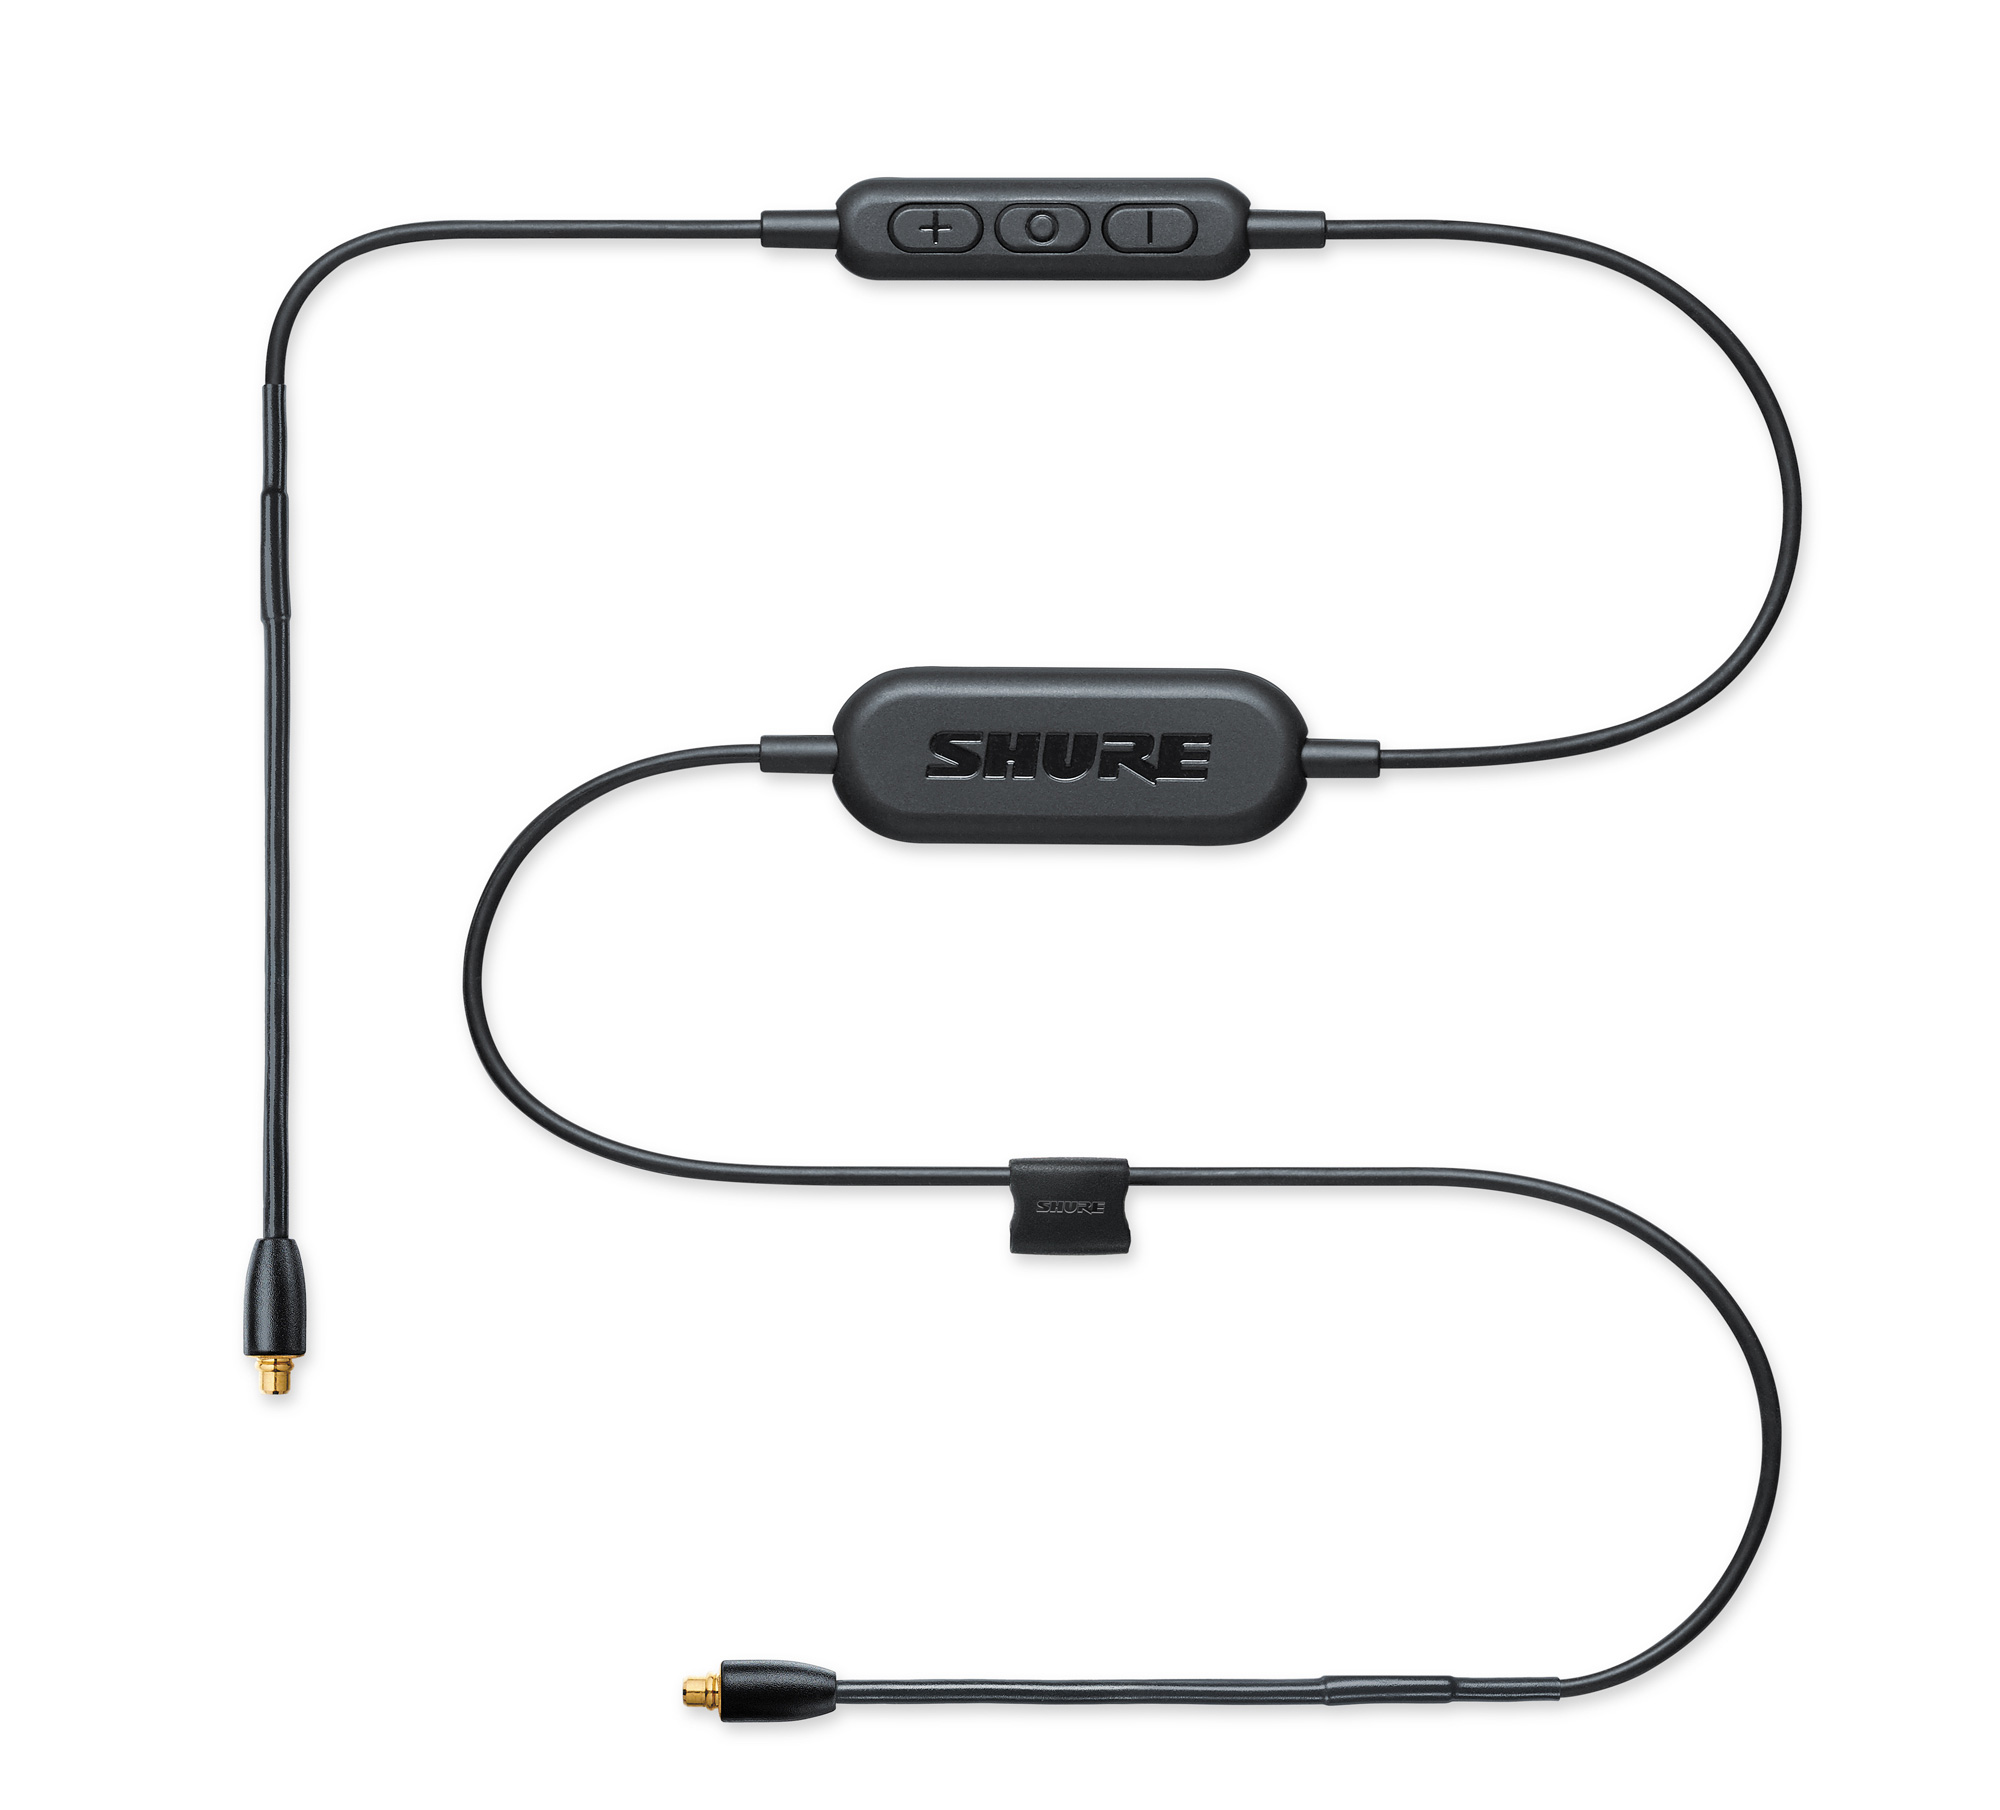 Shure RMCE-BT1 Bluetooth Enabled Remote plus Accessory Cable for Most SE Earphones - Rechargeable Li-ion Battery